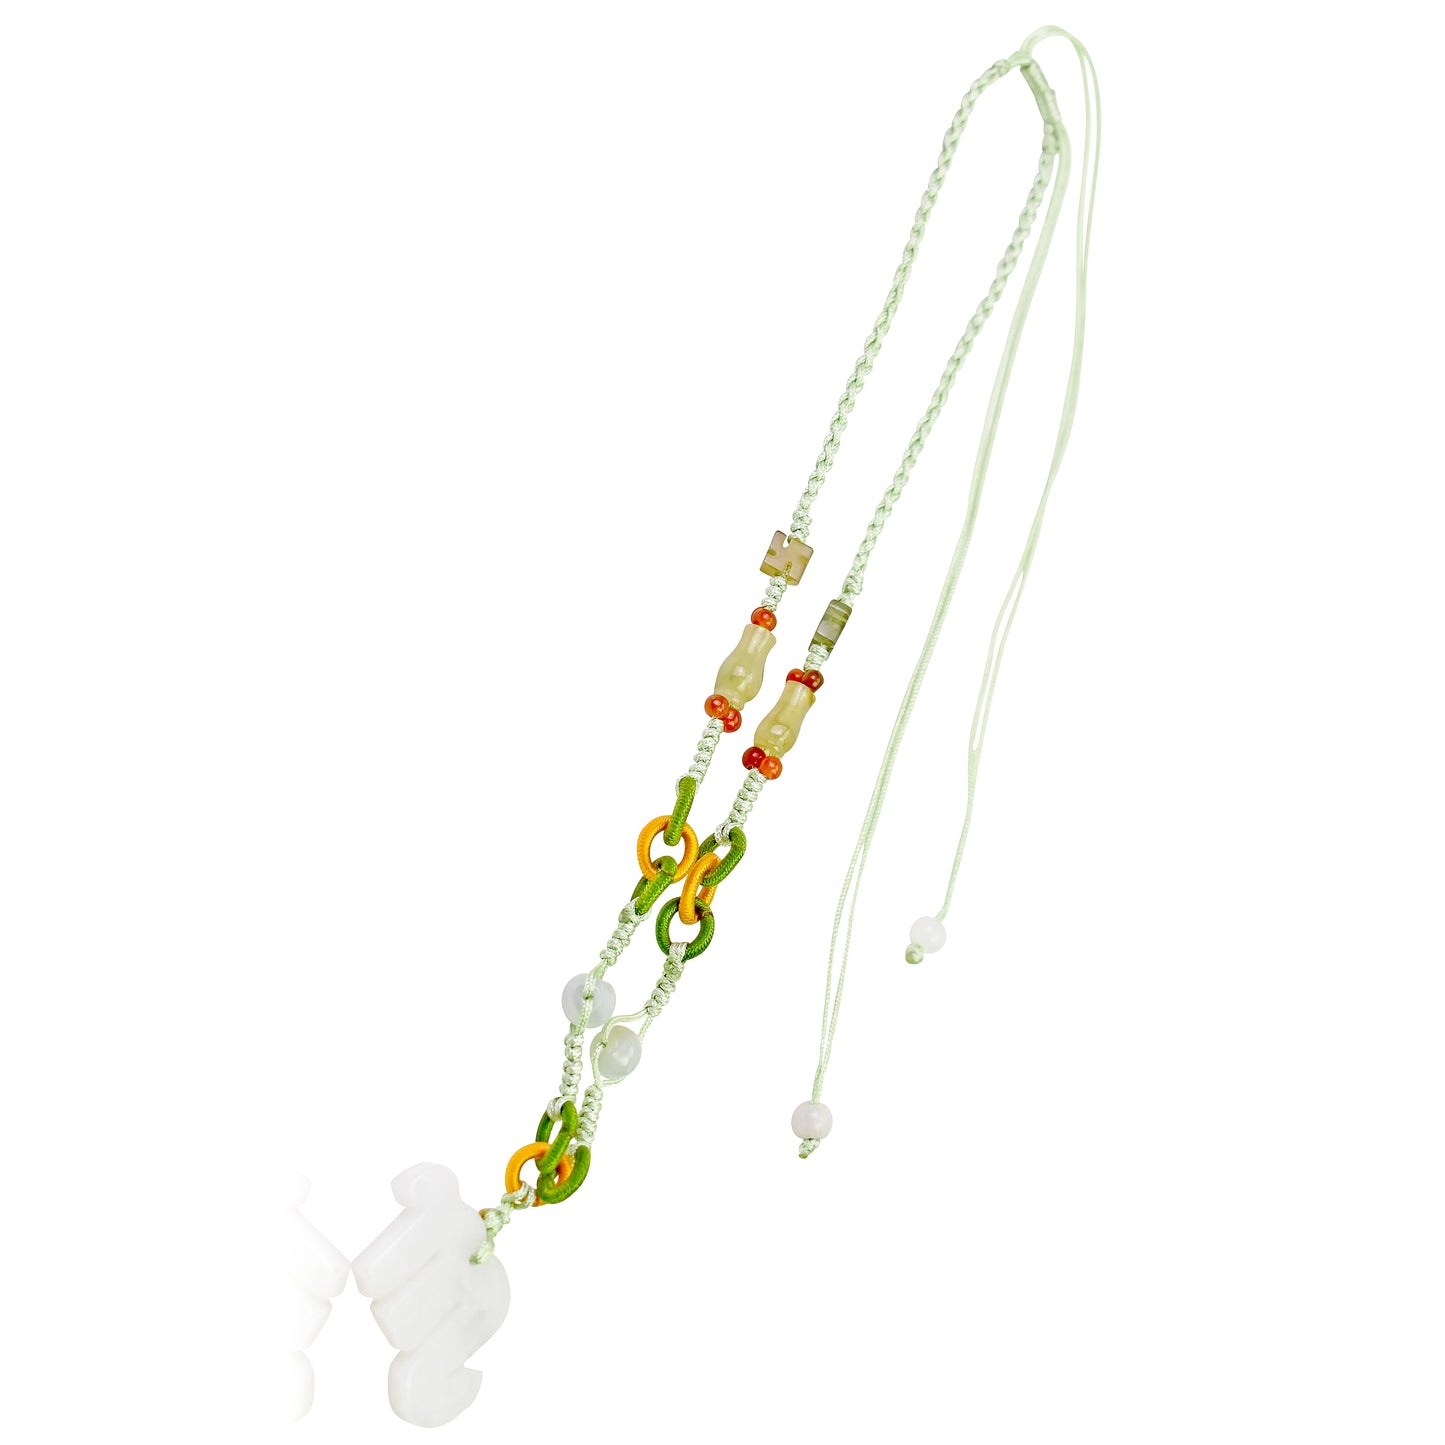 Add a Mystical Touch to Your Look with a Scorpio Jade Necklace made with Sea GreenCord